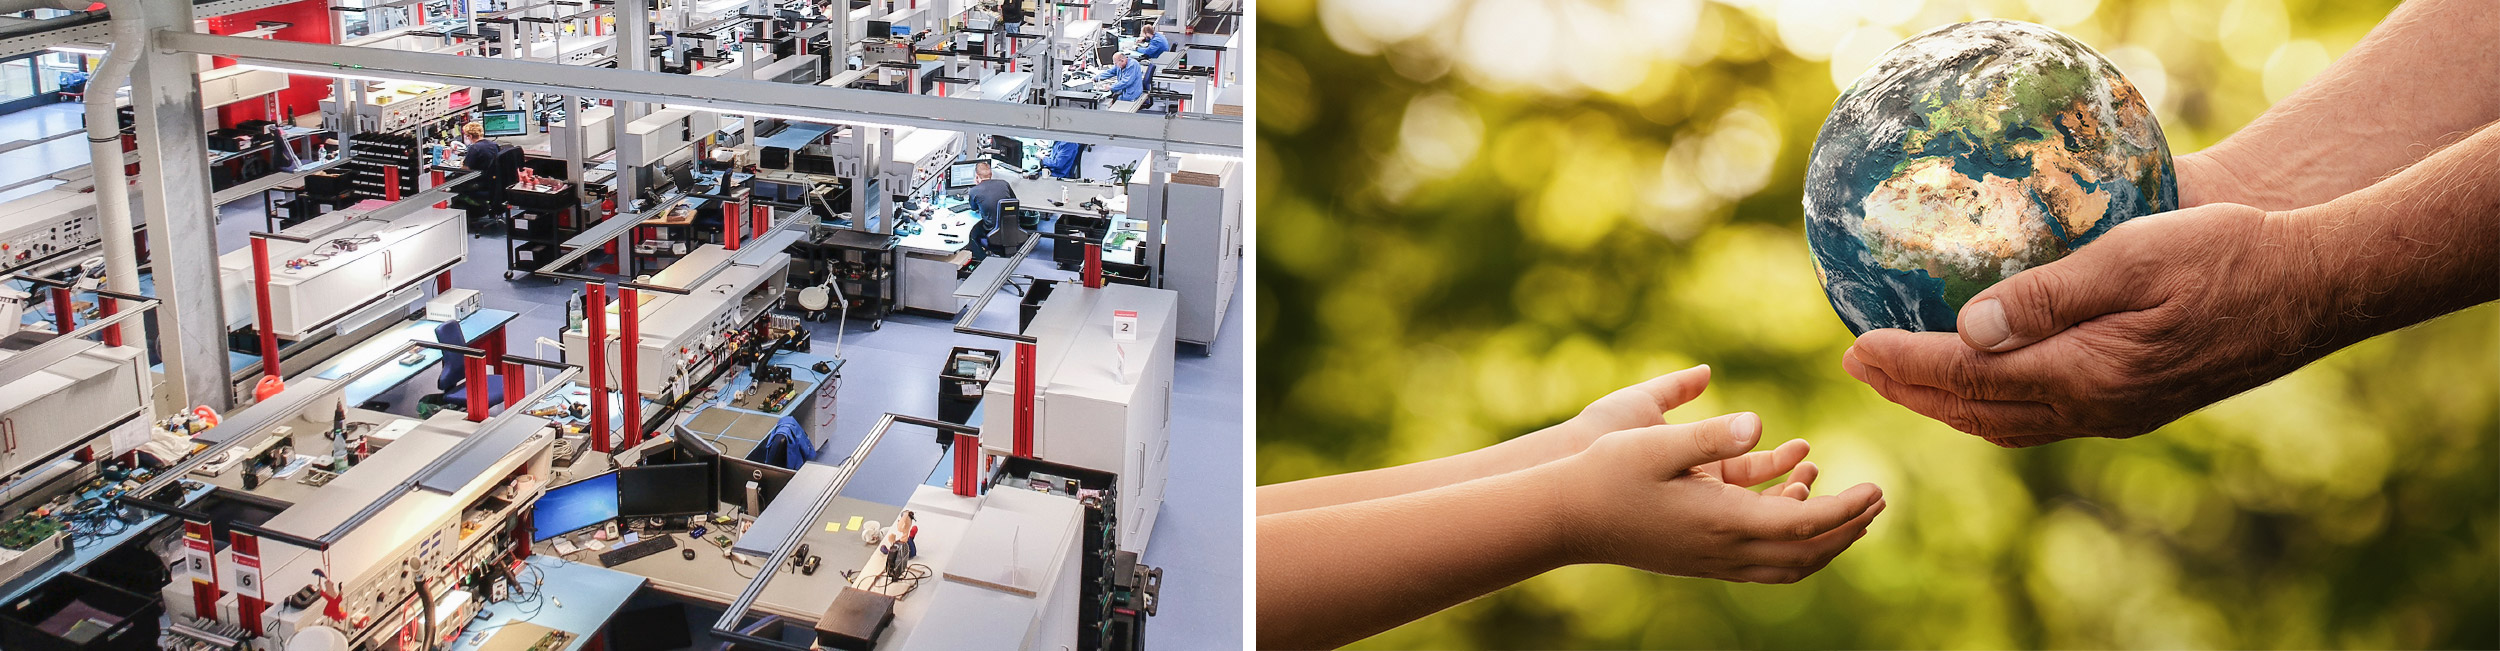 Sustainable growth without limits - BVS Industrie-Elektronik